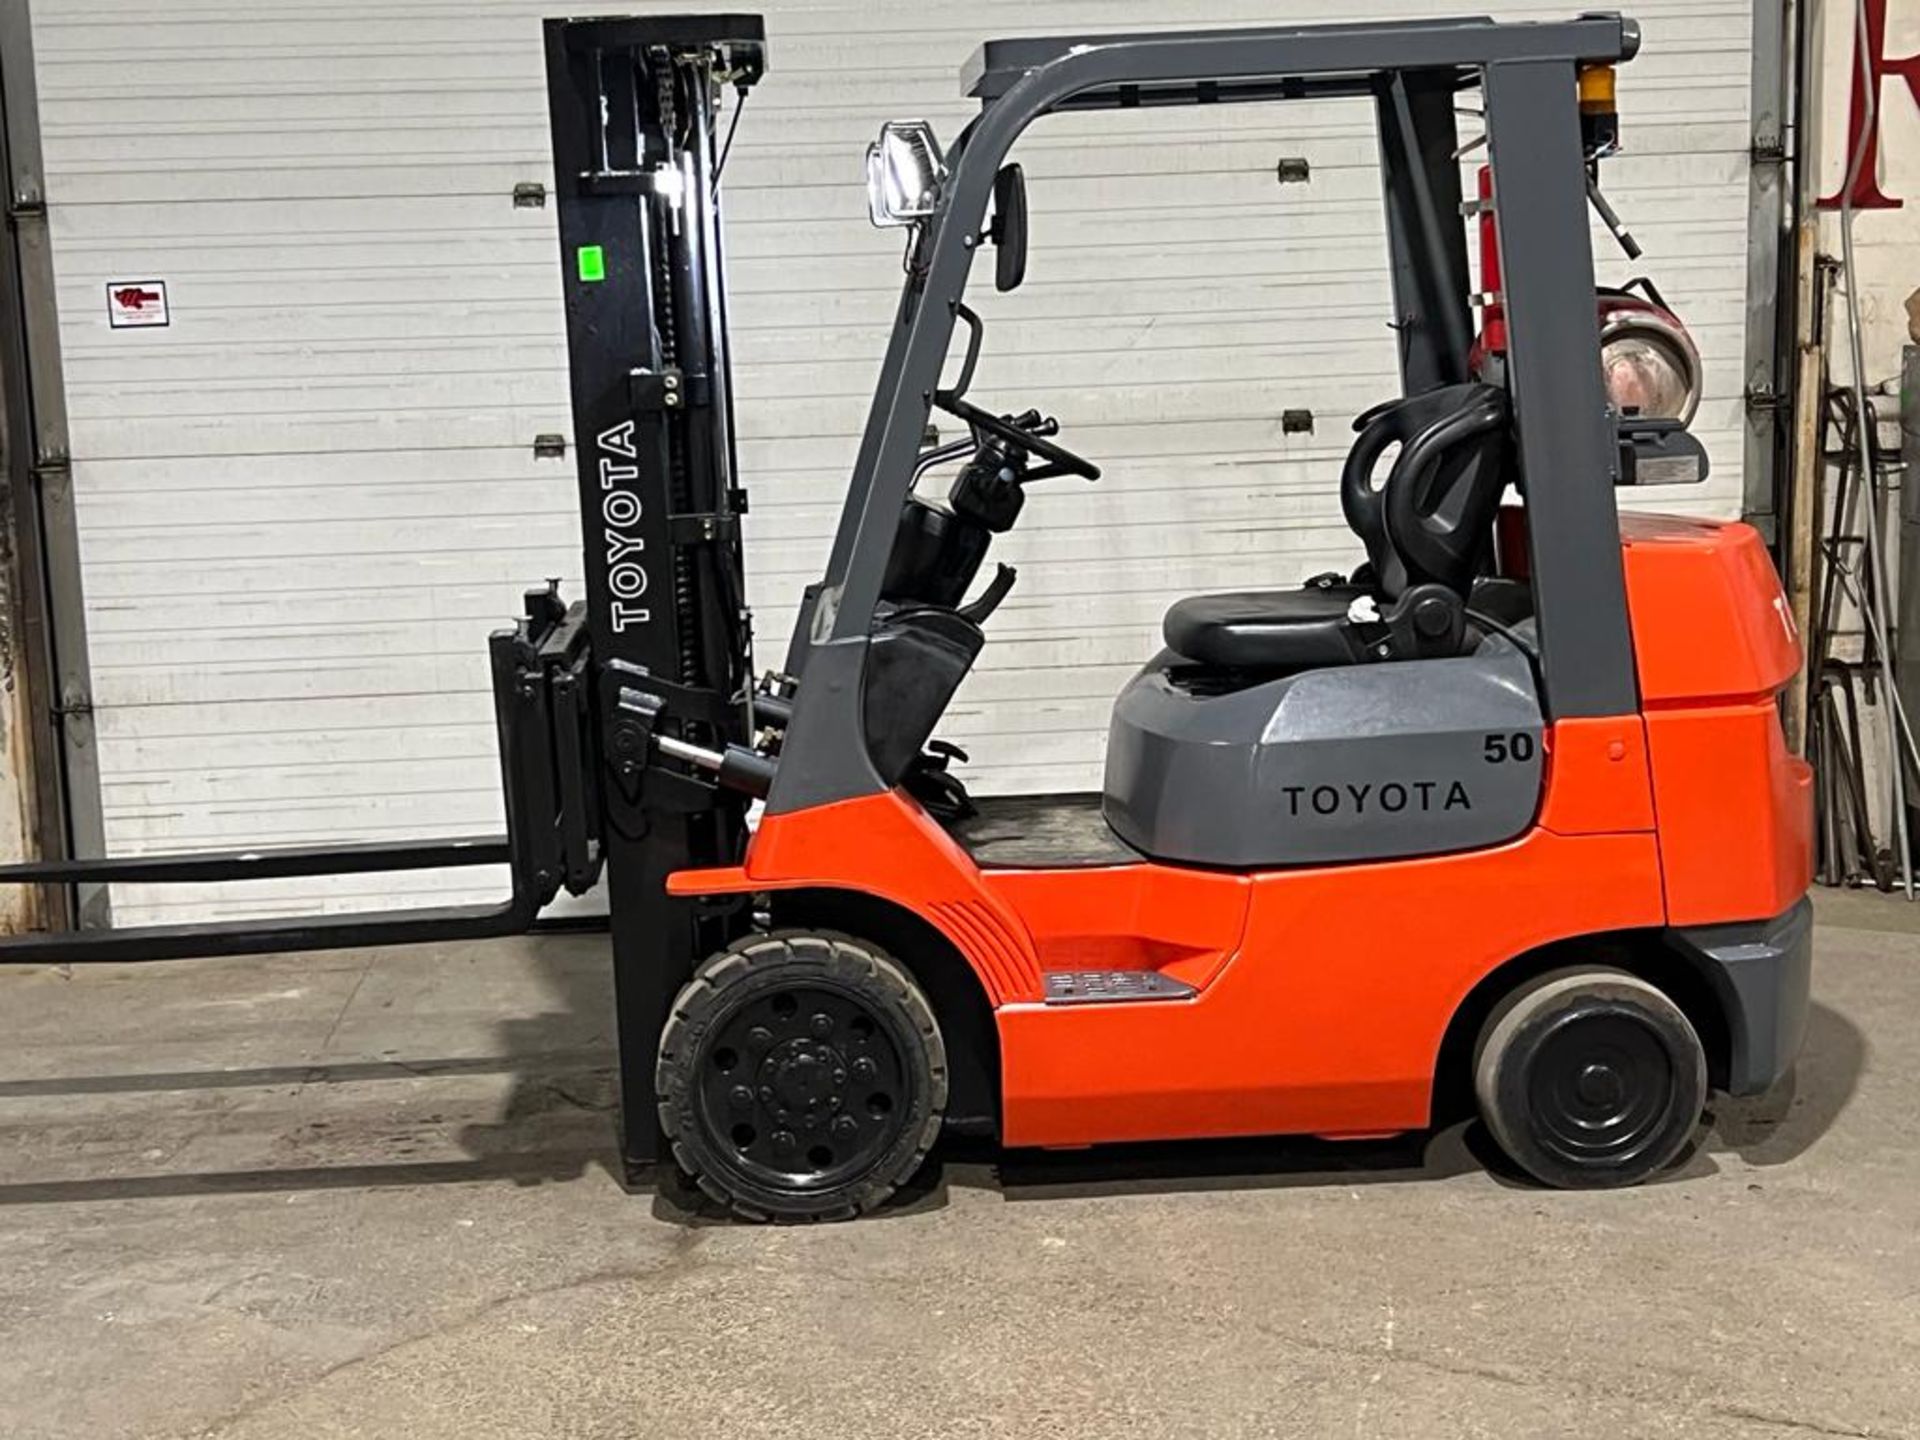 Toyota 5,000lbs Capacity LPG (Propane) Forklift with sideshift and 3-STAGE MAST (no propane tank